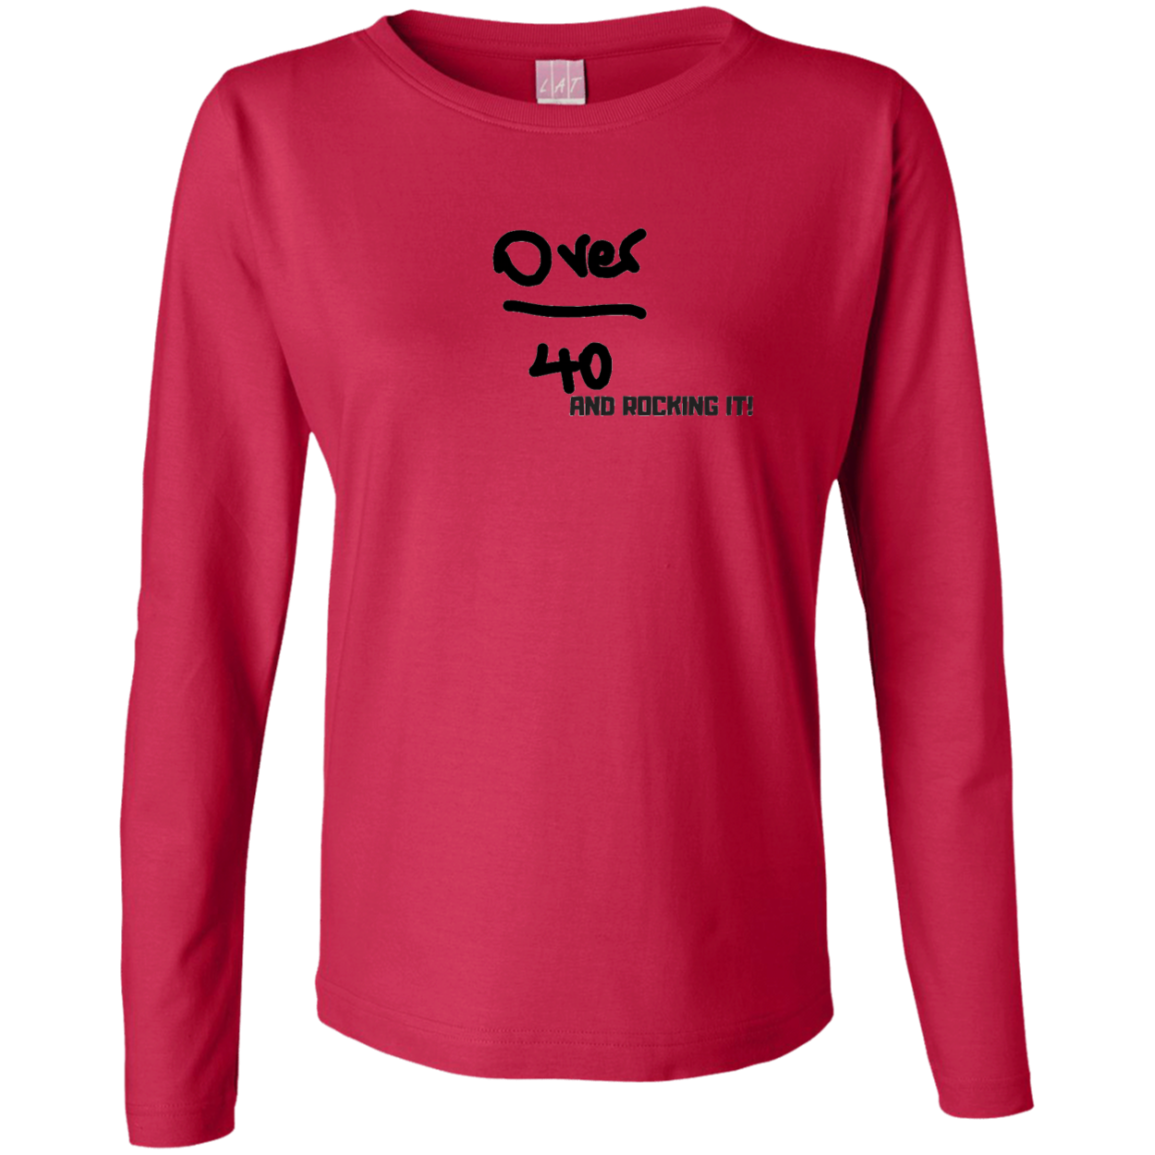 best inspirational shirts for confident midlife women over 40 and over 50